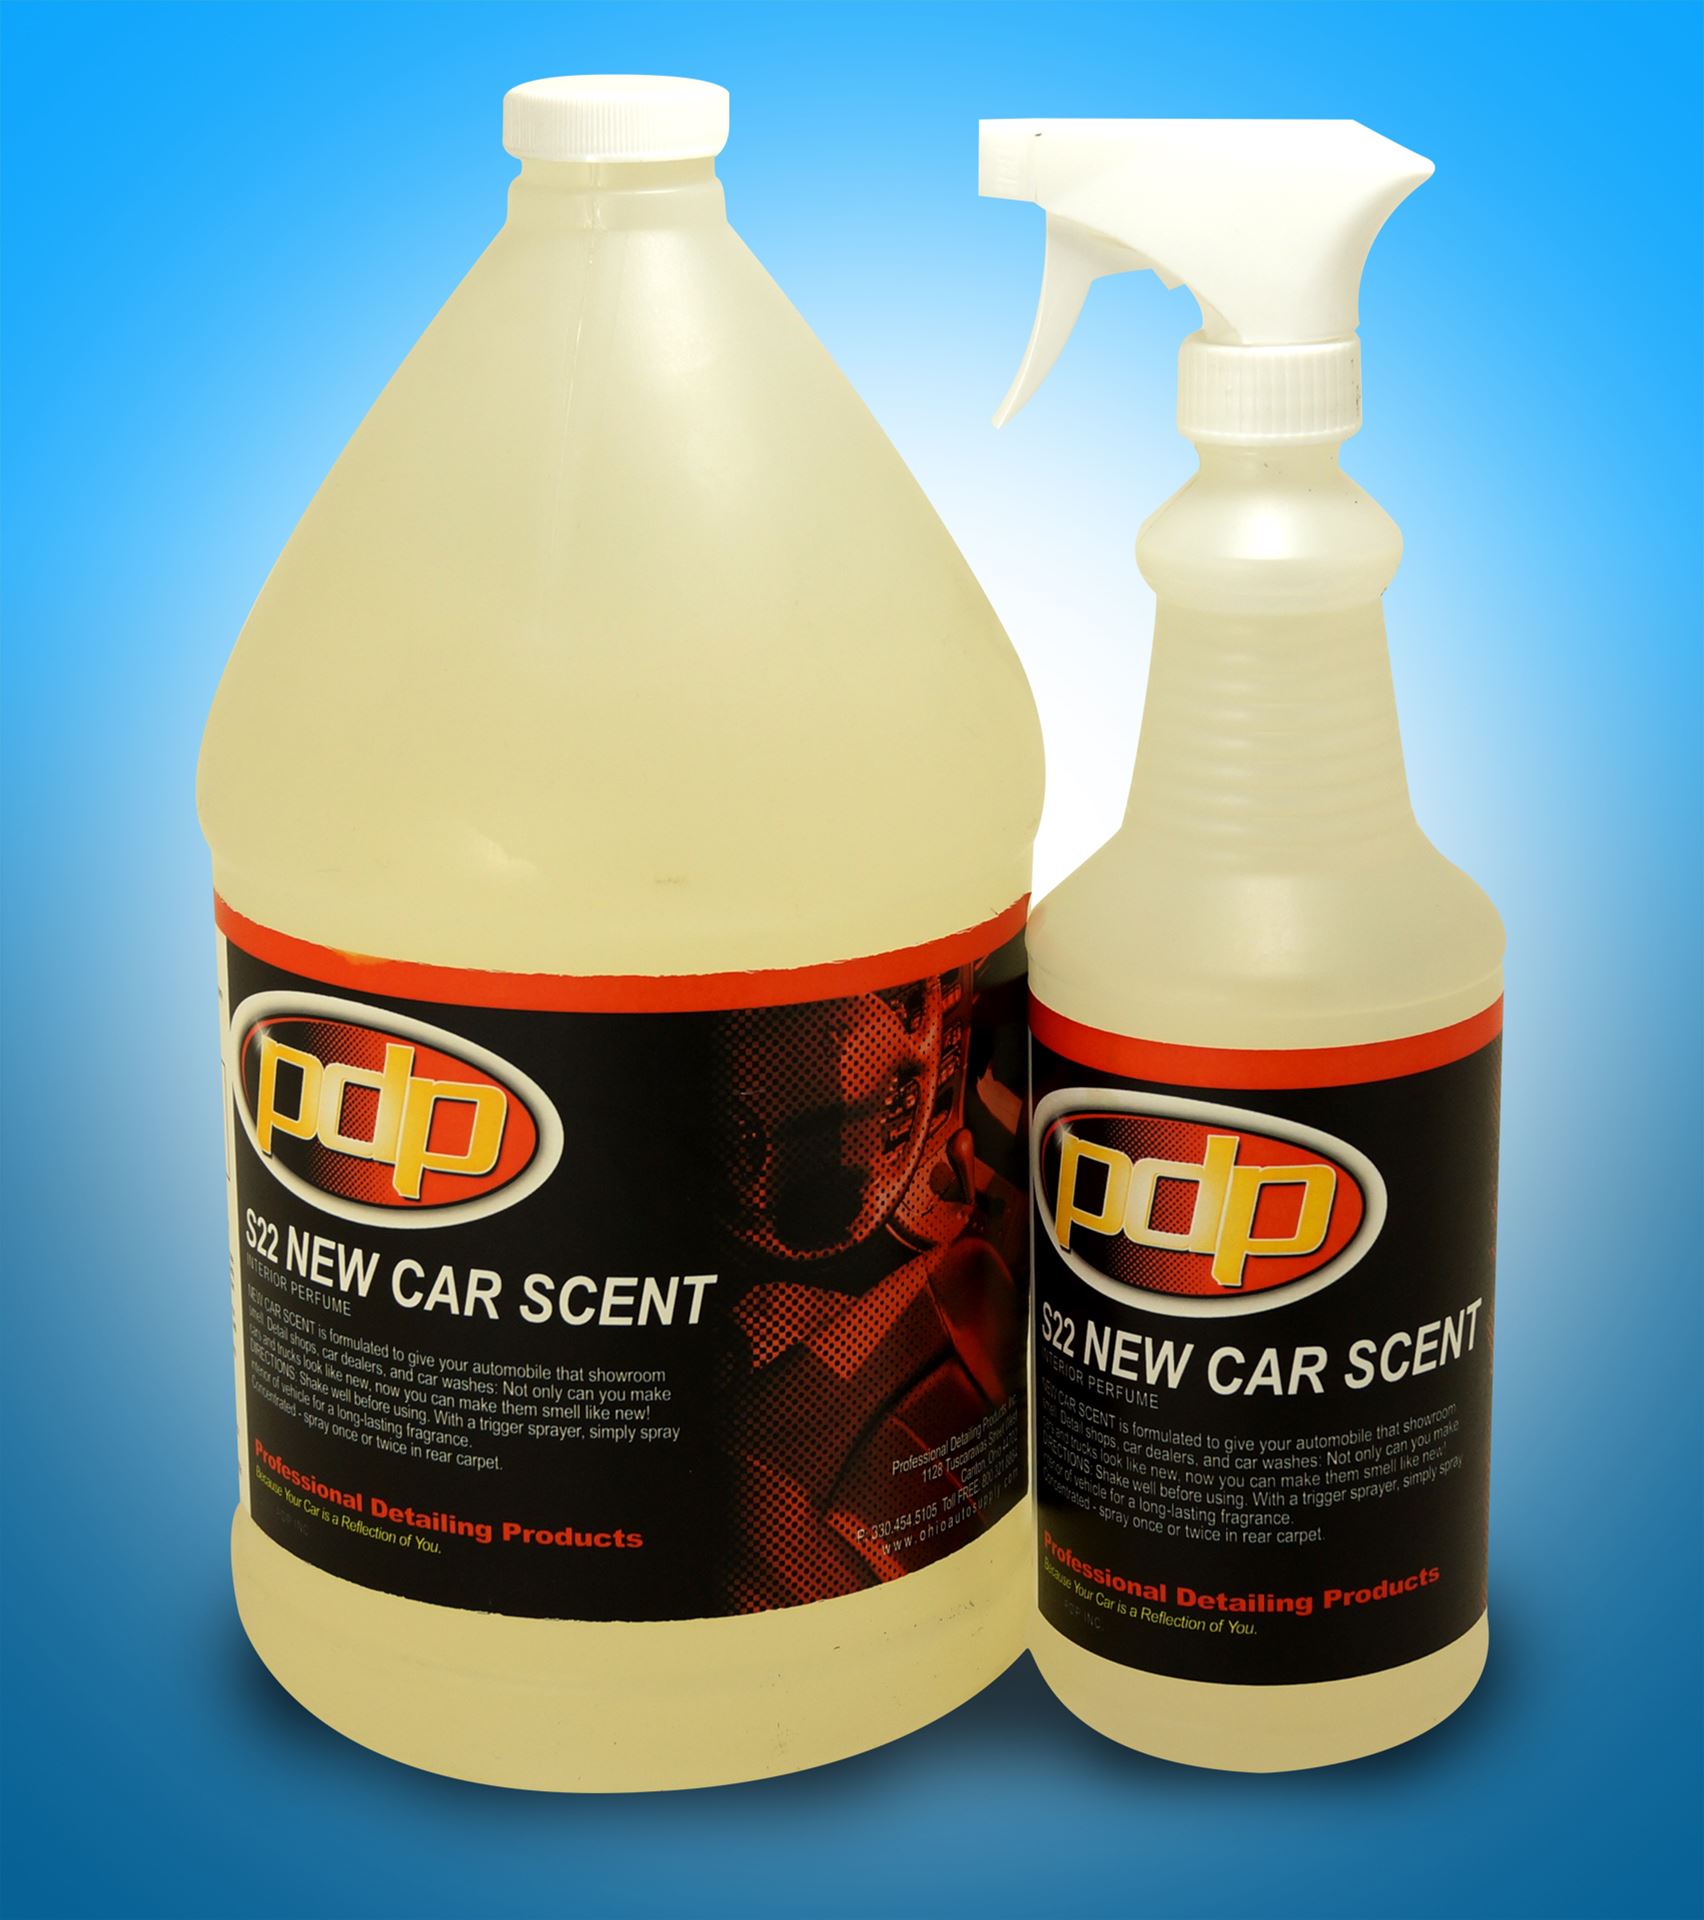 NEW CAR SCENT. Professional Detailing Products, Because Your Car